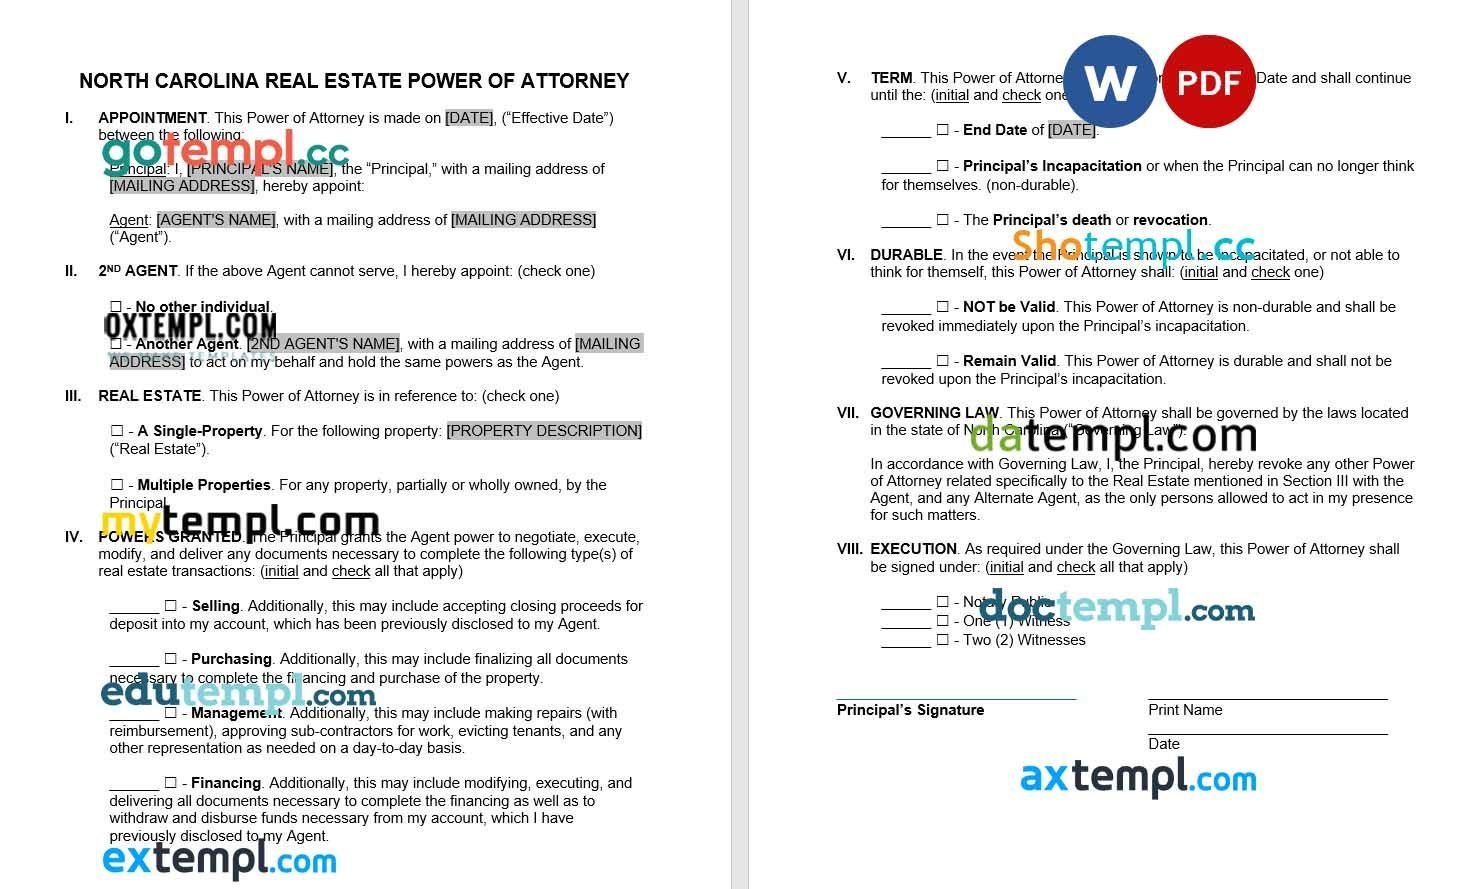 North Carolina Real Estate Power of Attorney Form example, fully editable